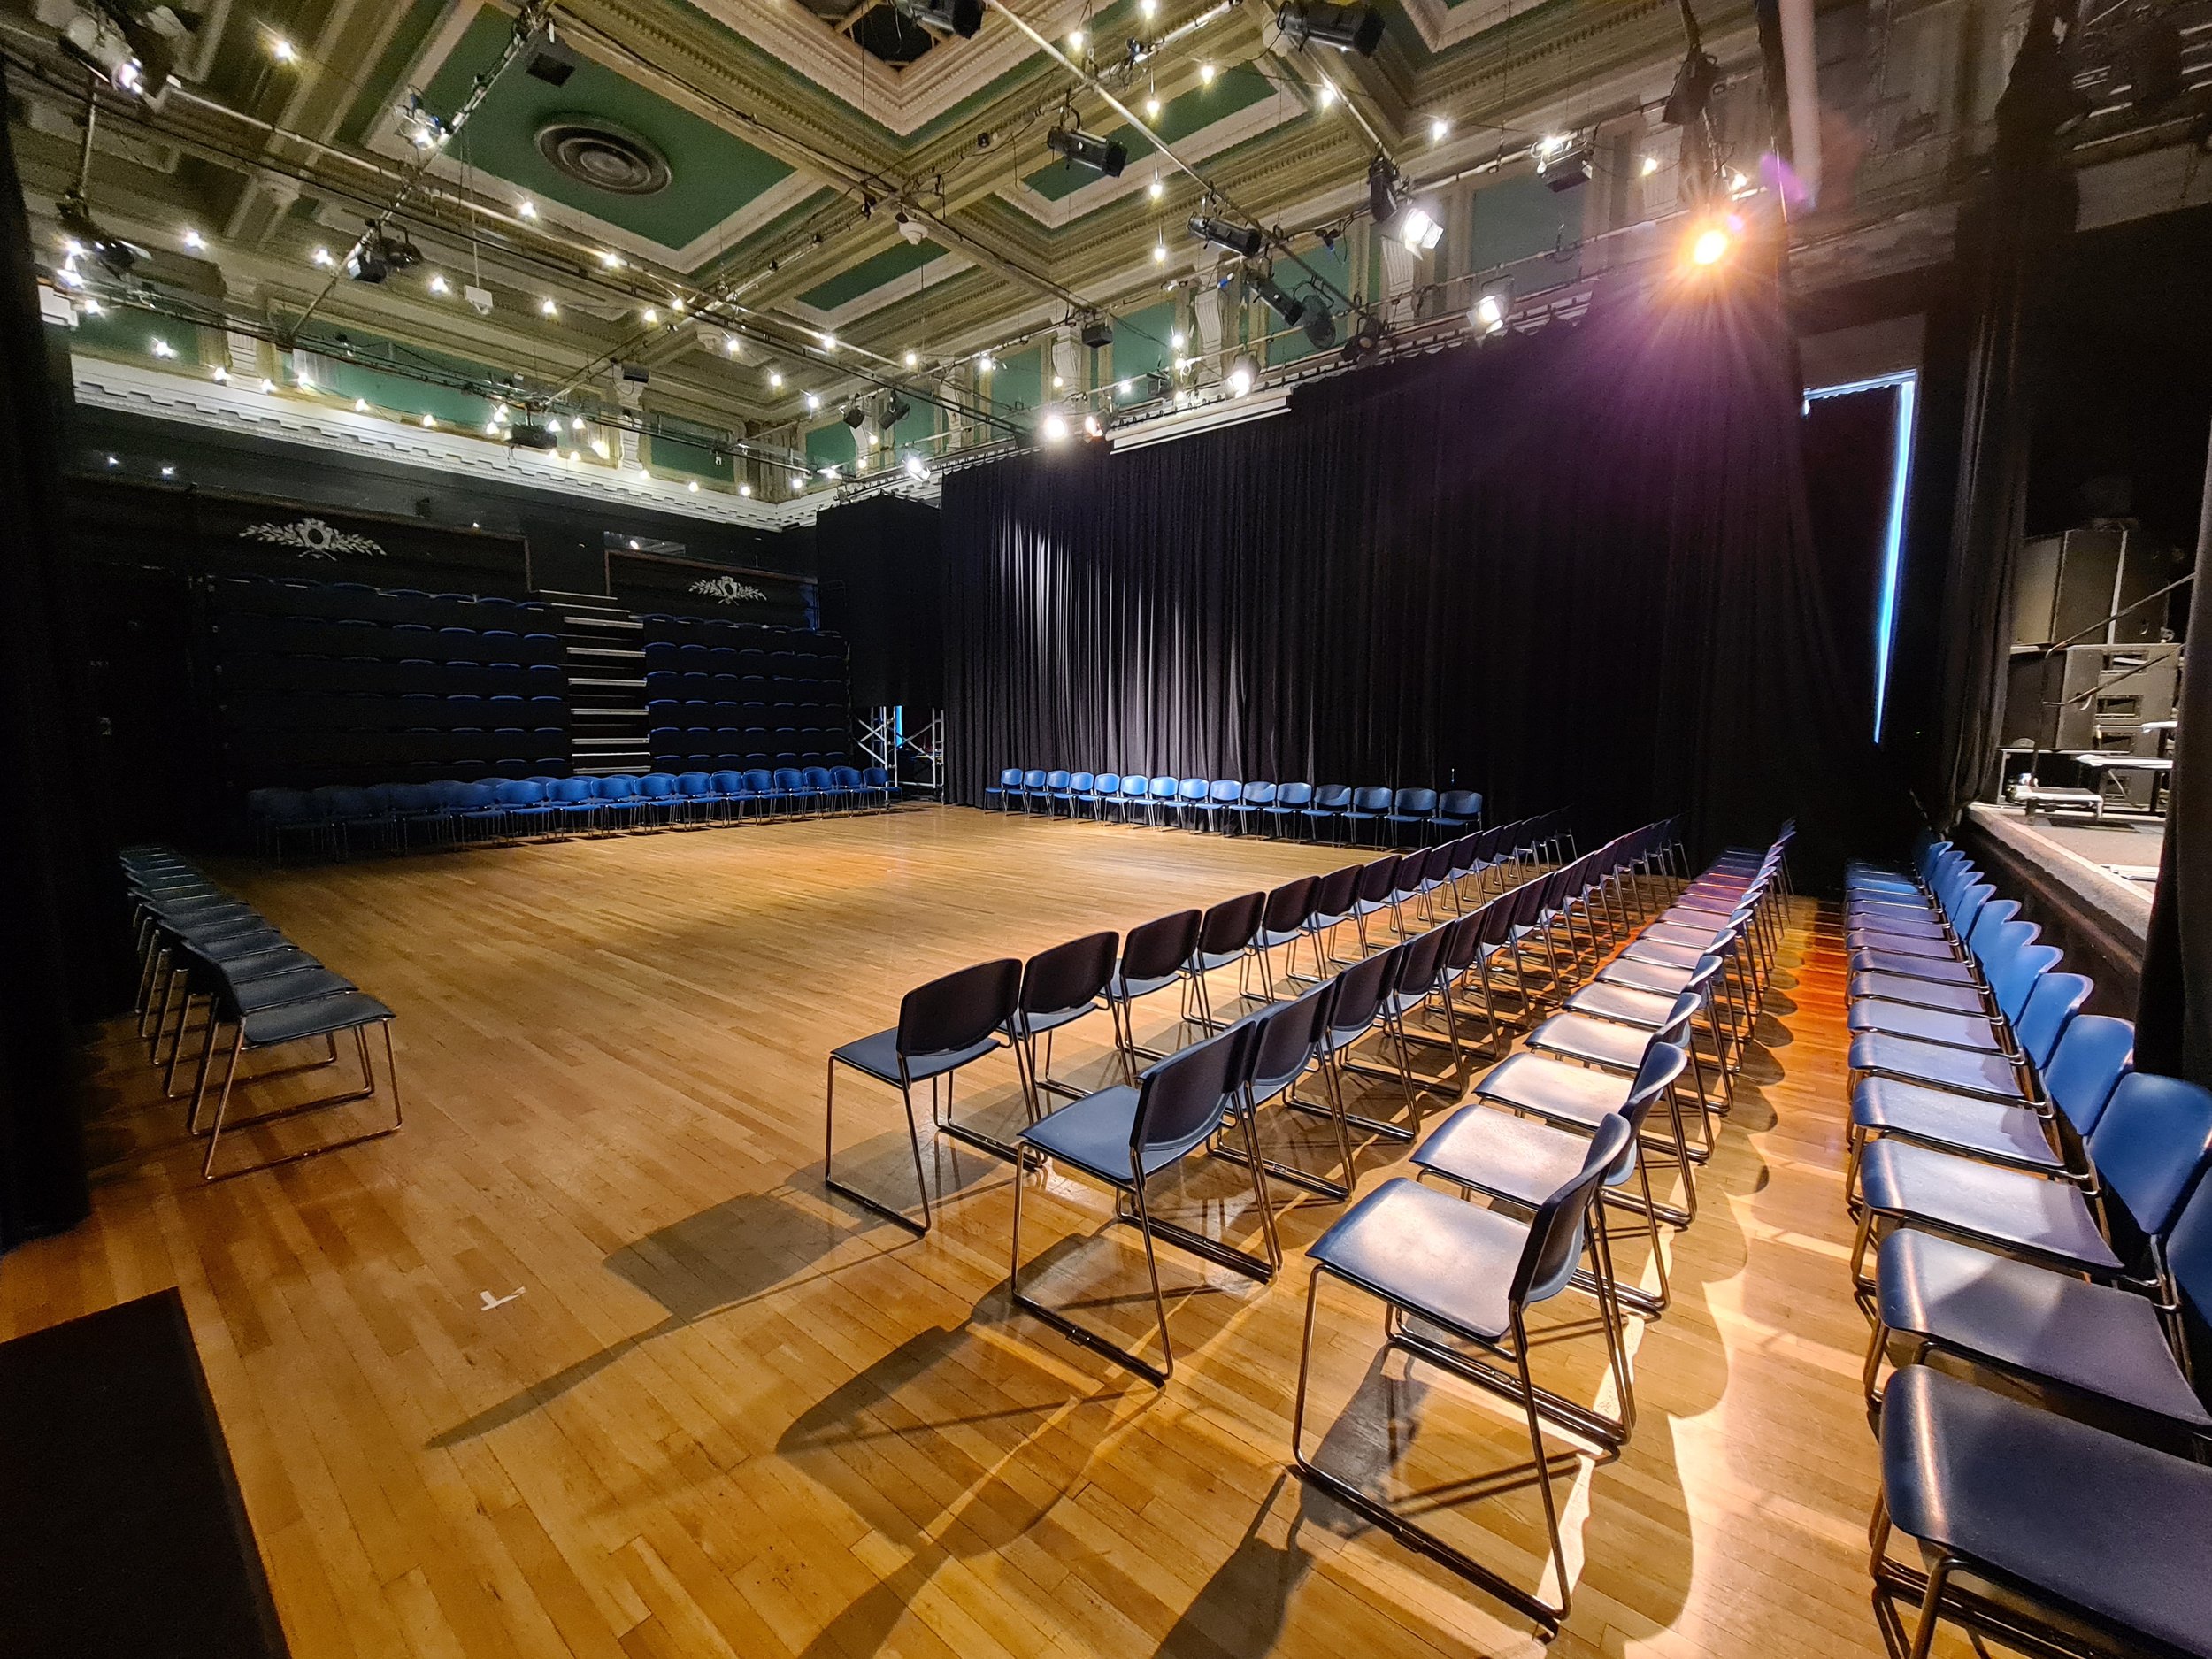 Gloucester-Guildhall-Hall-U-Shaped-Seating-Layout.jpg